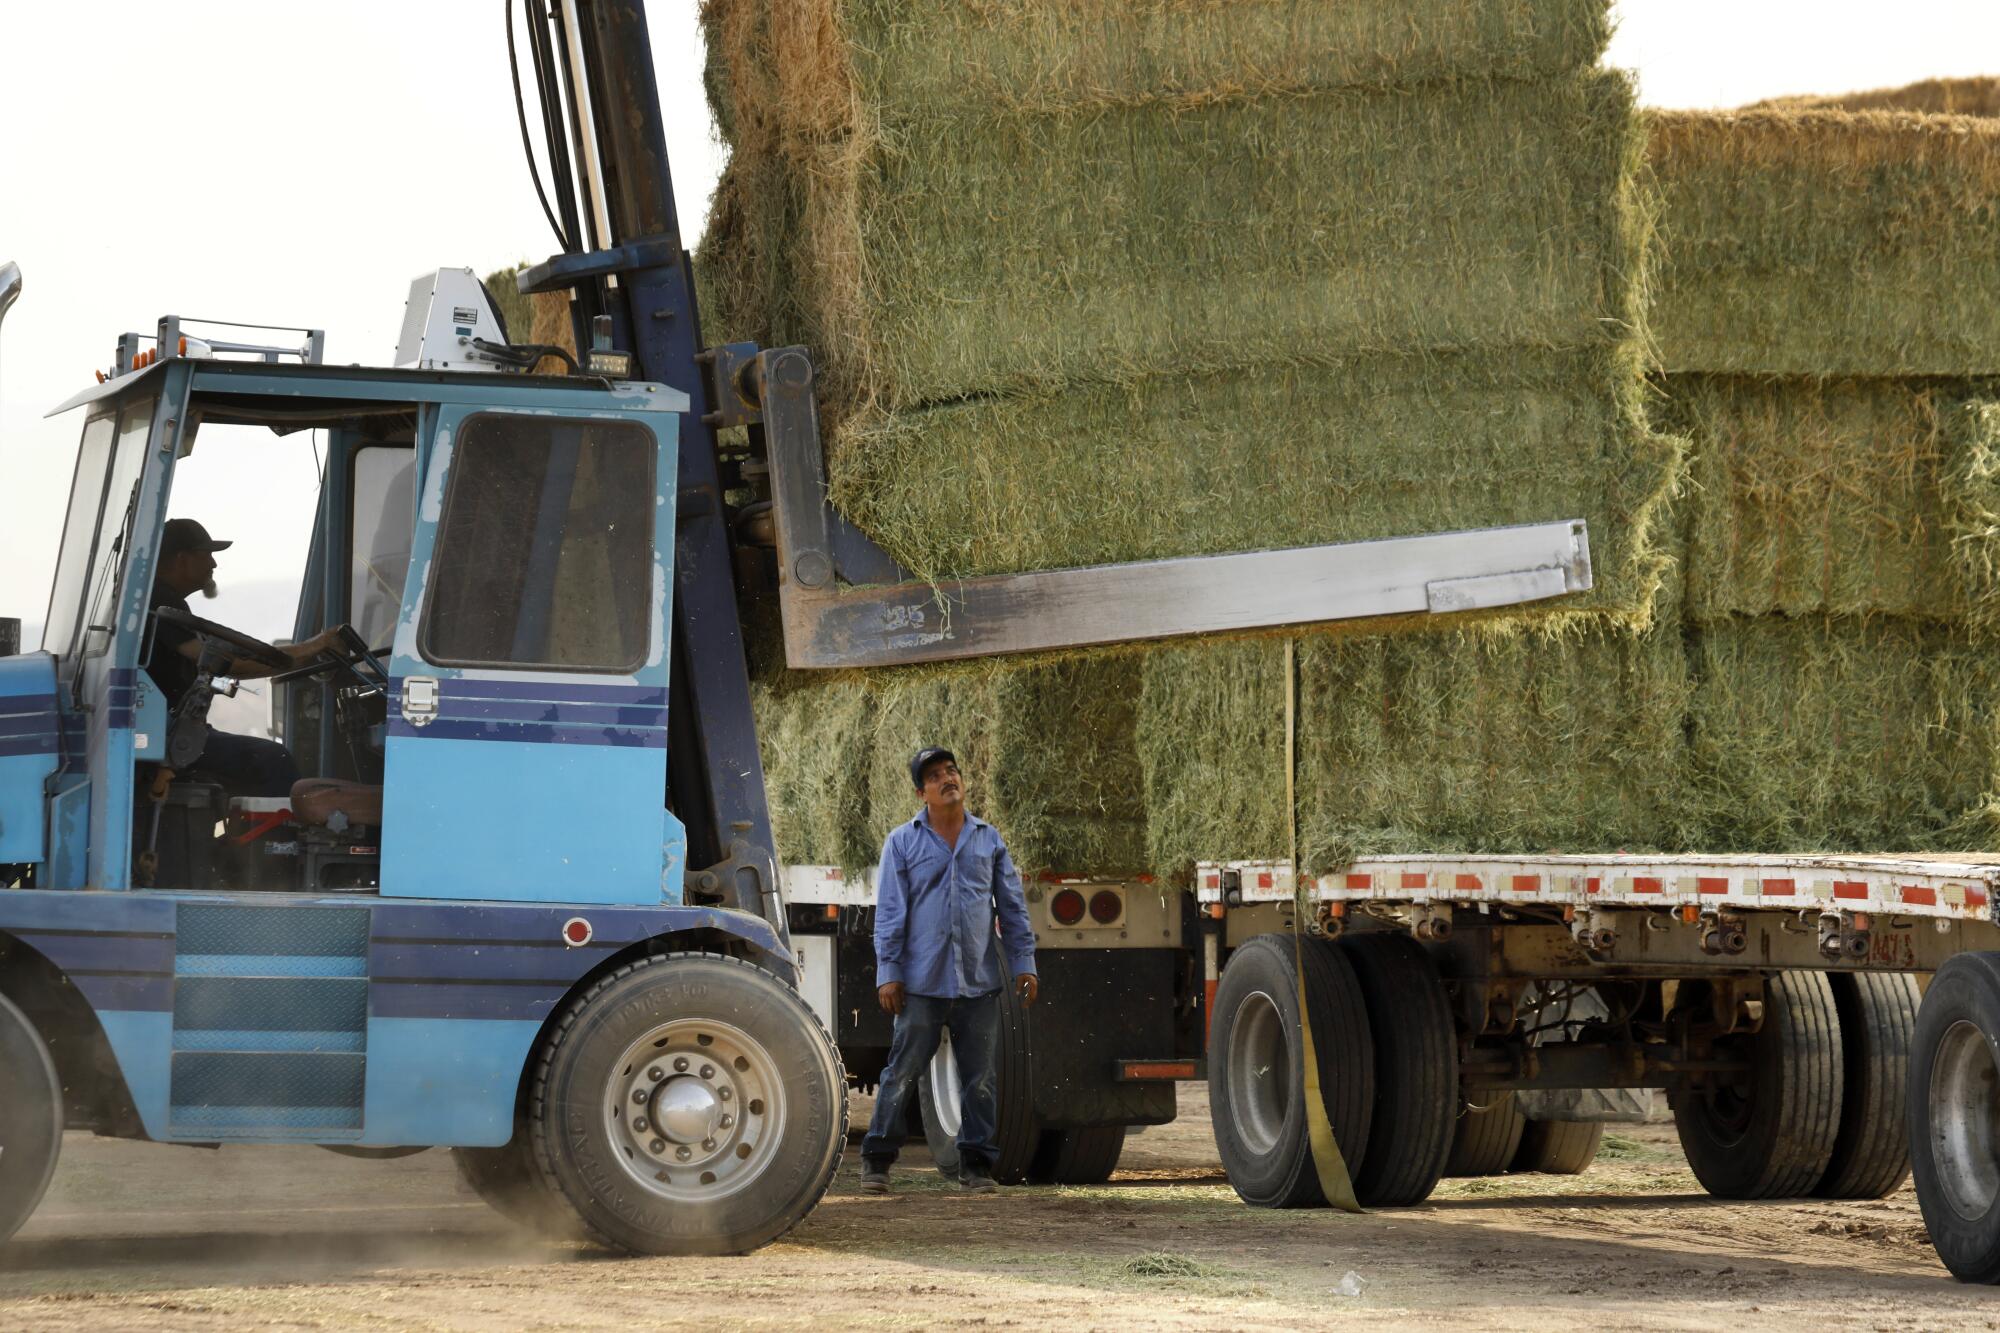 A forklift loads hay bales onto the bed of a semitruck.